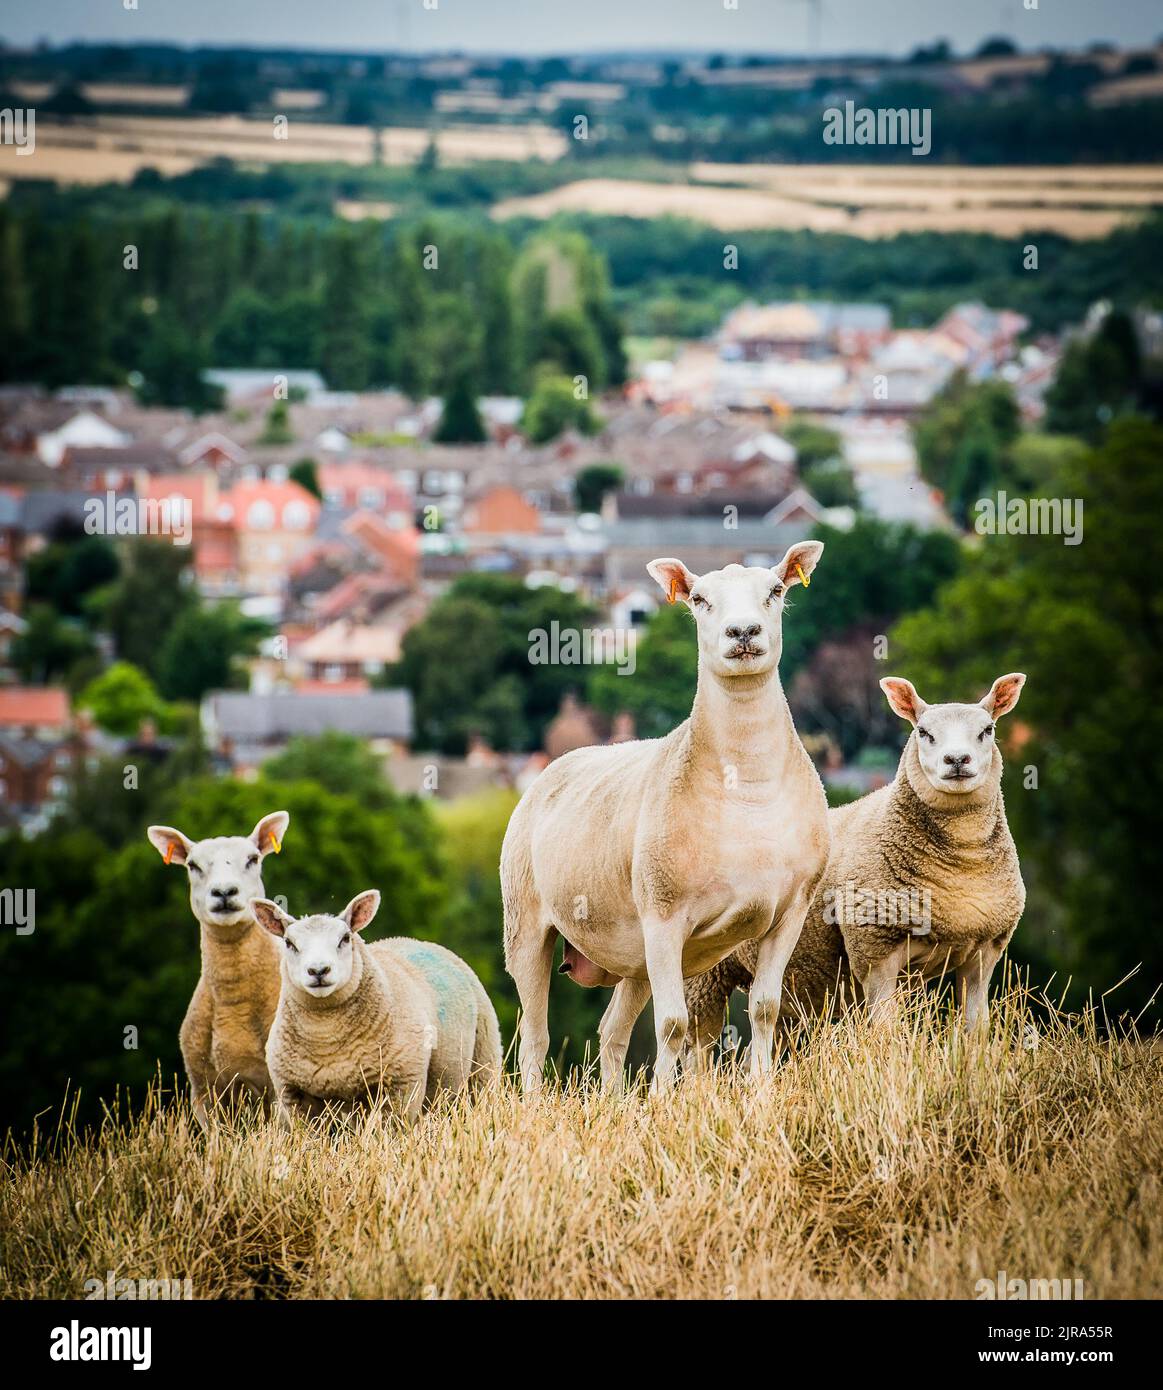 A Texel ewes with Blue Texel sire lambs, Nottinghamshire, UK Stock Photo